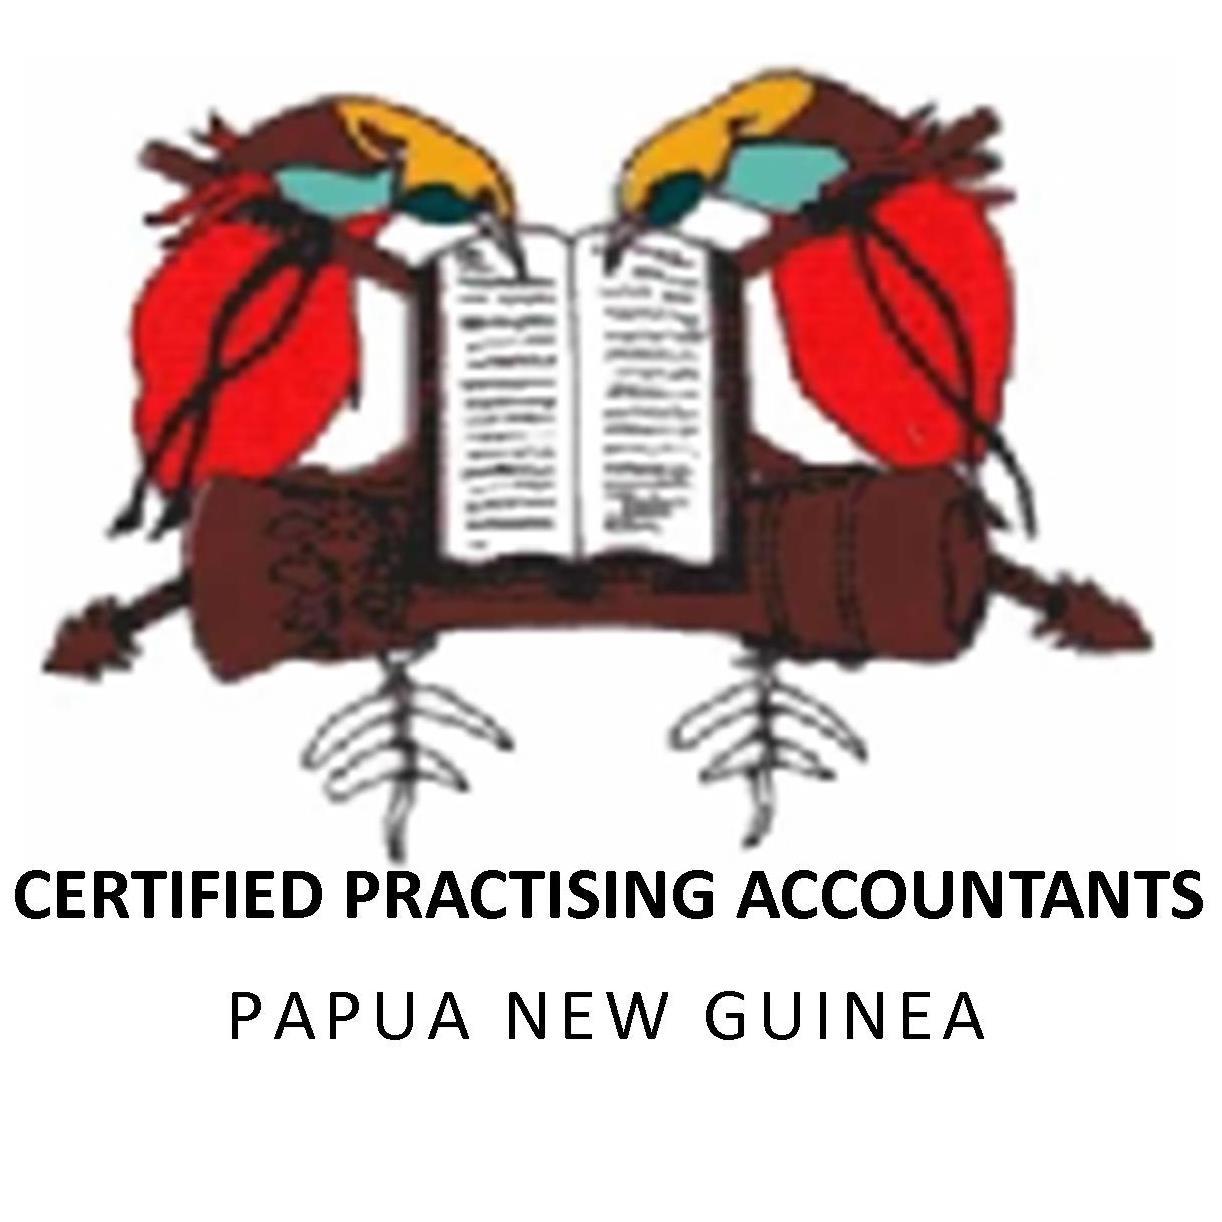 The Leading accounting professional body in PNG and the Pacific